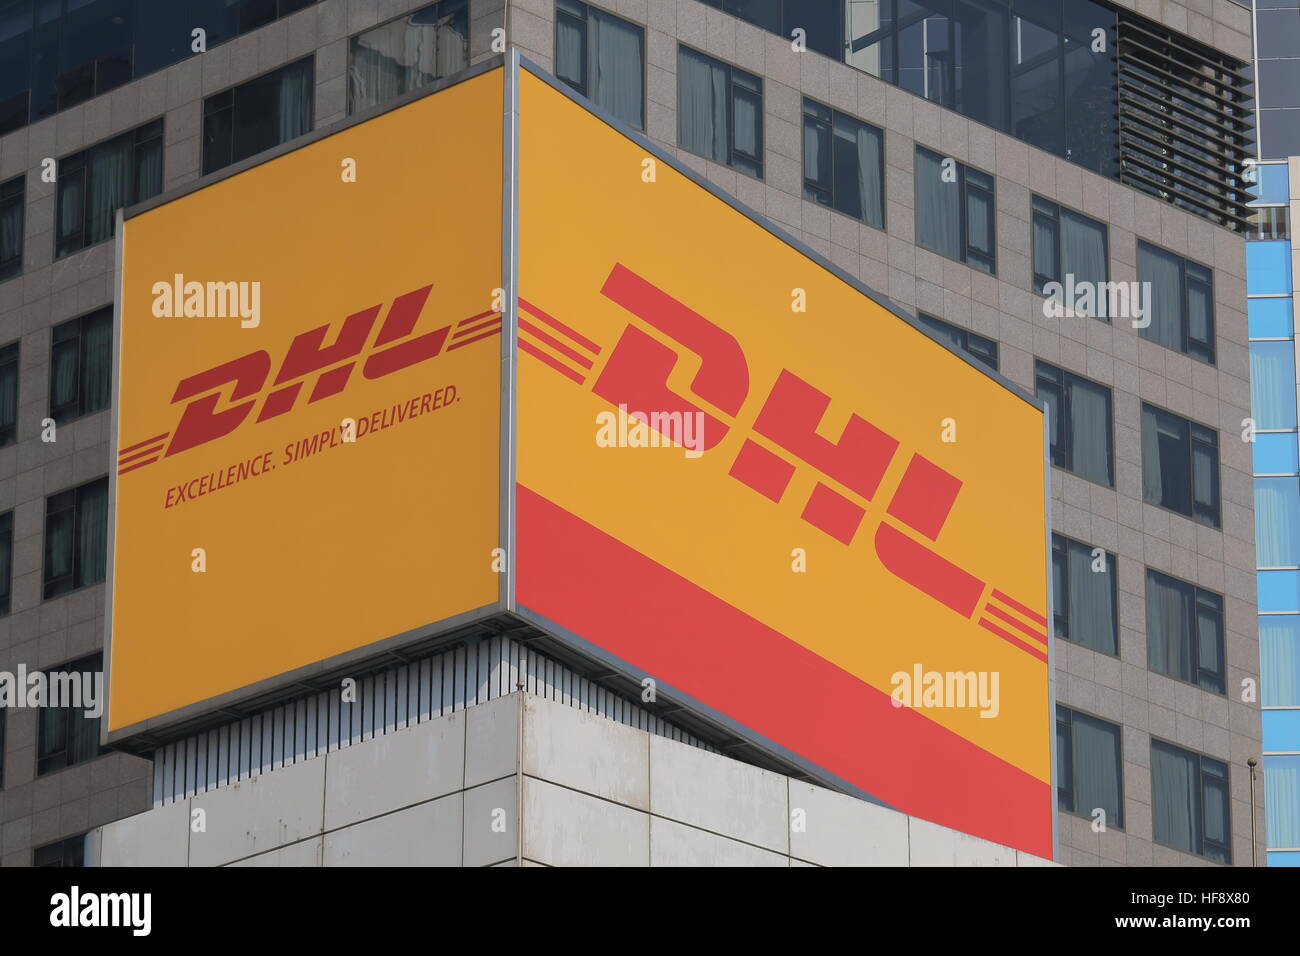 DHL Express. DHL Express is a division of the German logistics company Deutsche Post DHL providing international express mail services. Stock Photo